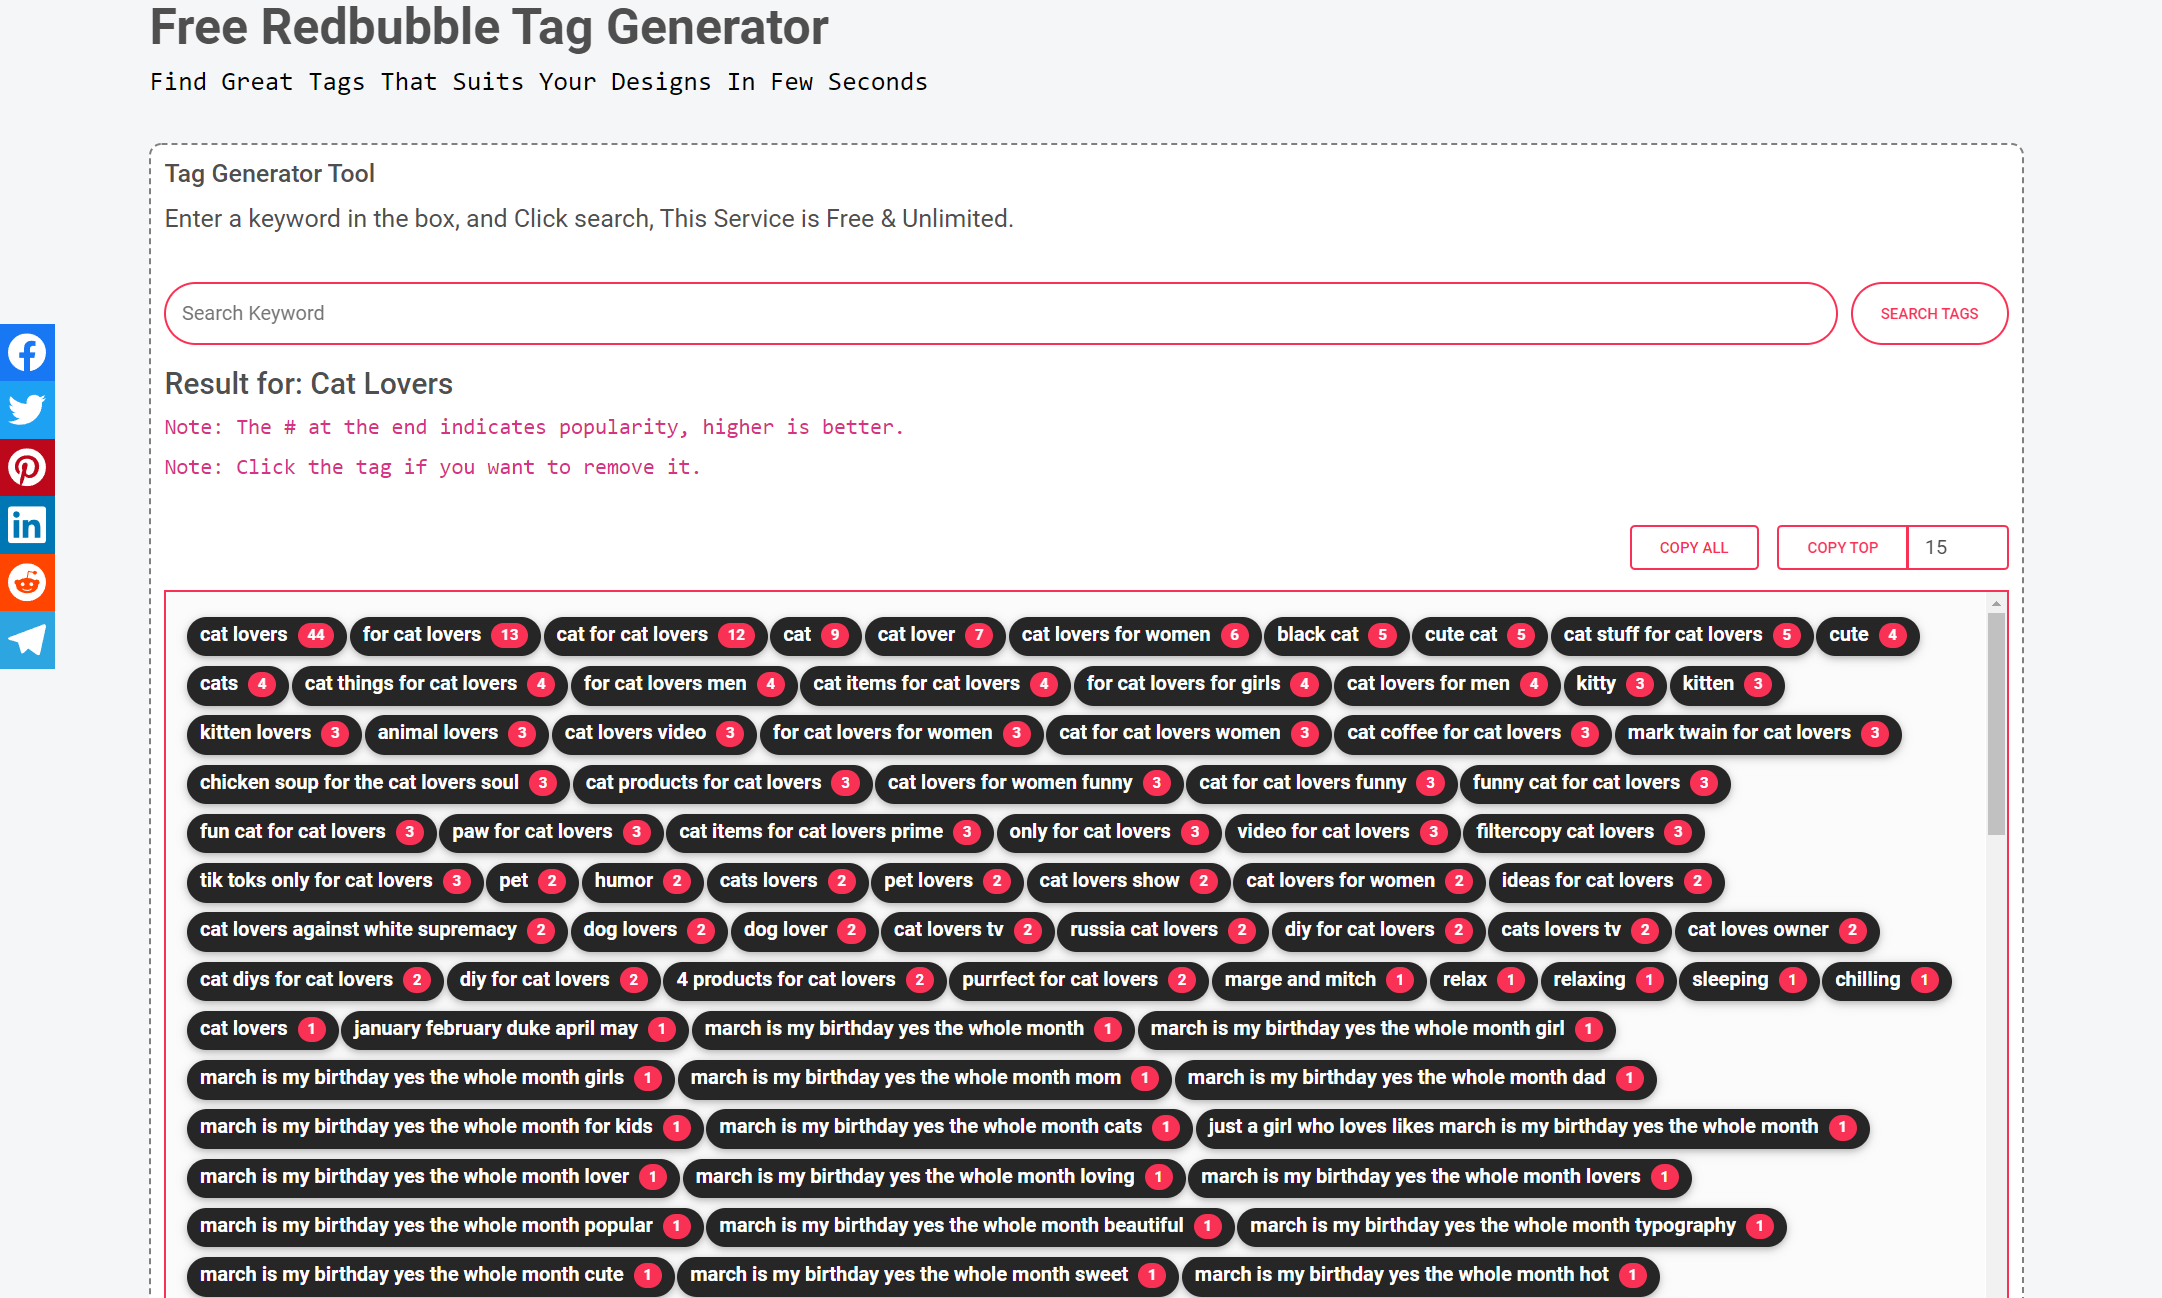 Best Redbubble Tools - Free Redbubble Tags Generator Tool